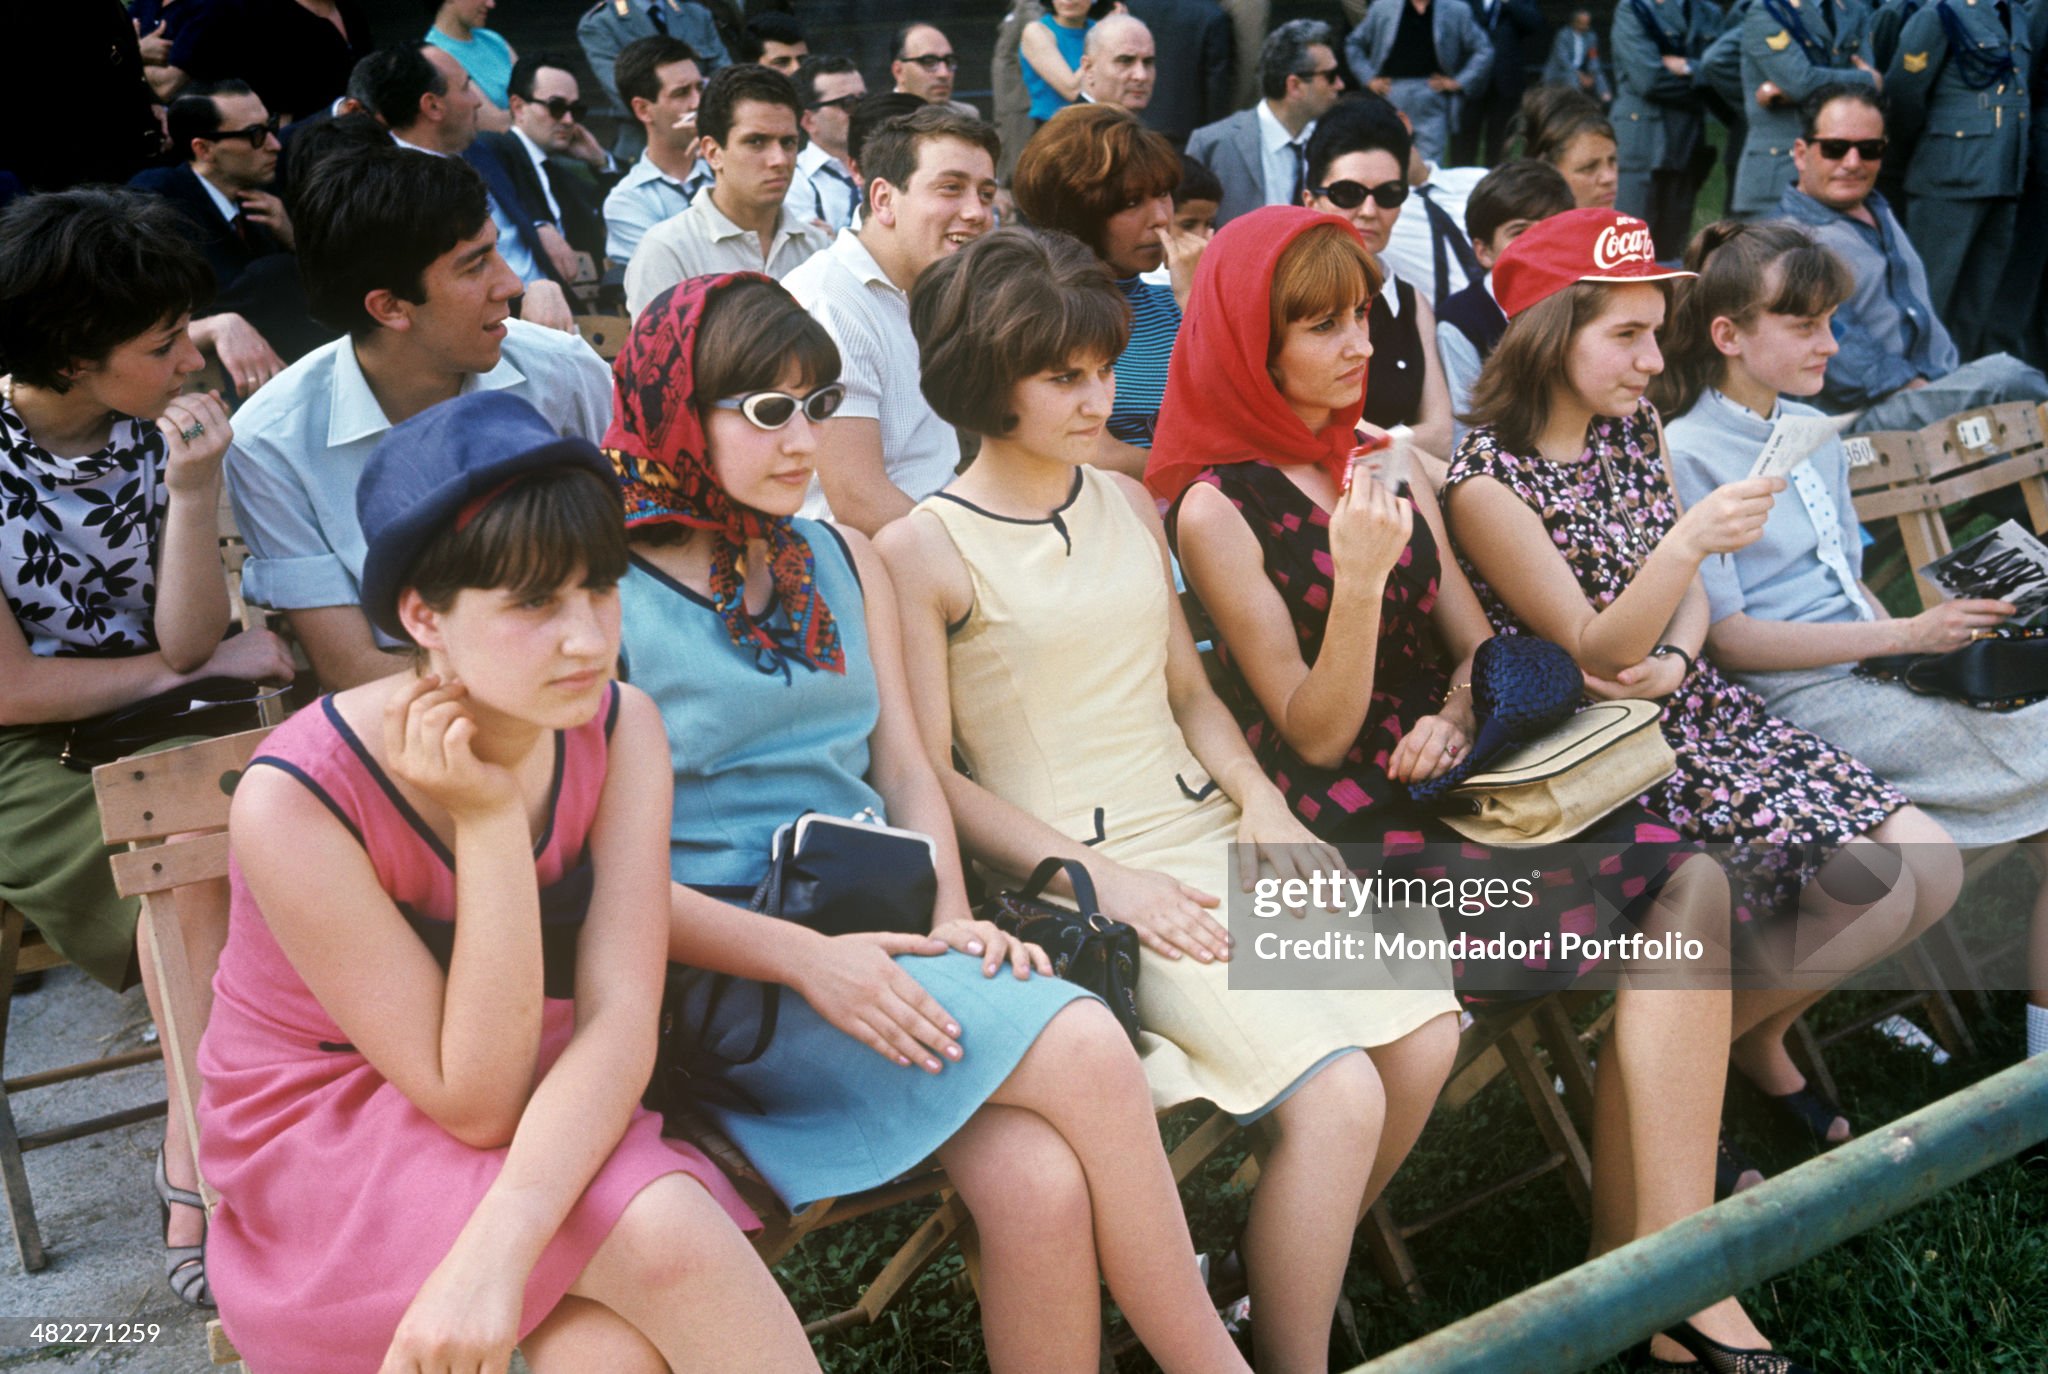 Some young Italian fans attending the concert of the rock band The Beatles at the Vigorelli Velodrome in Milan on 24 June 1965. 